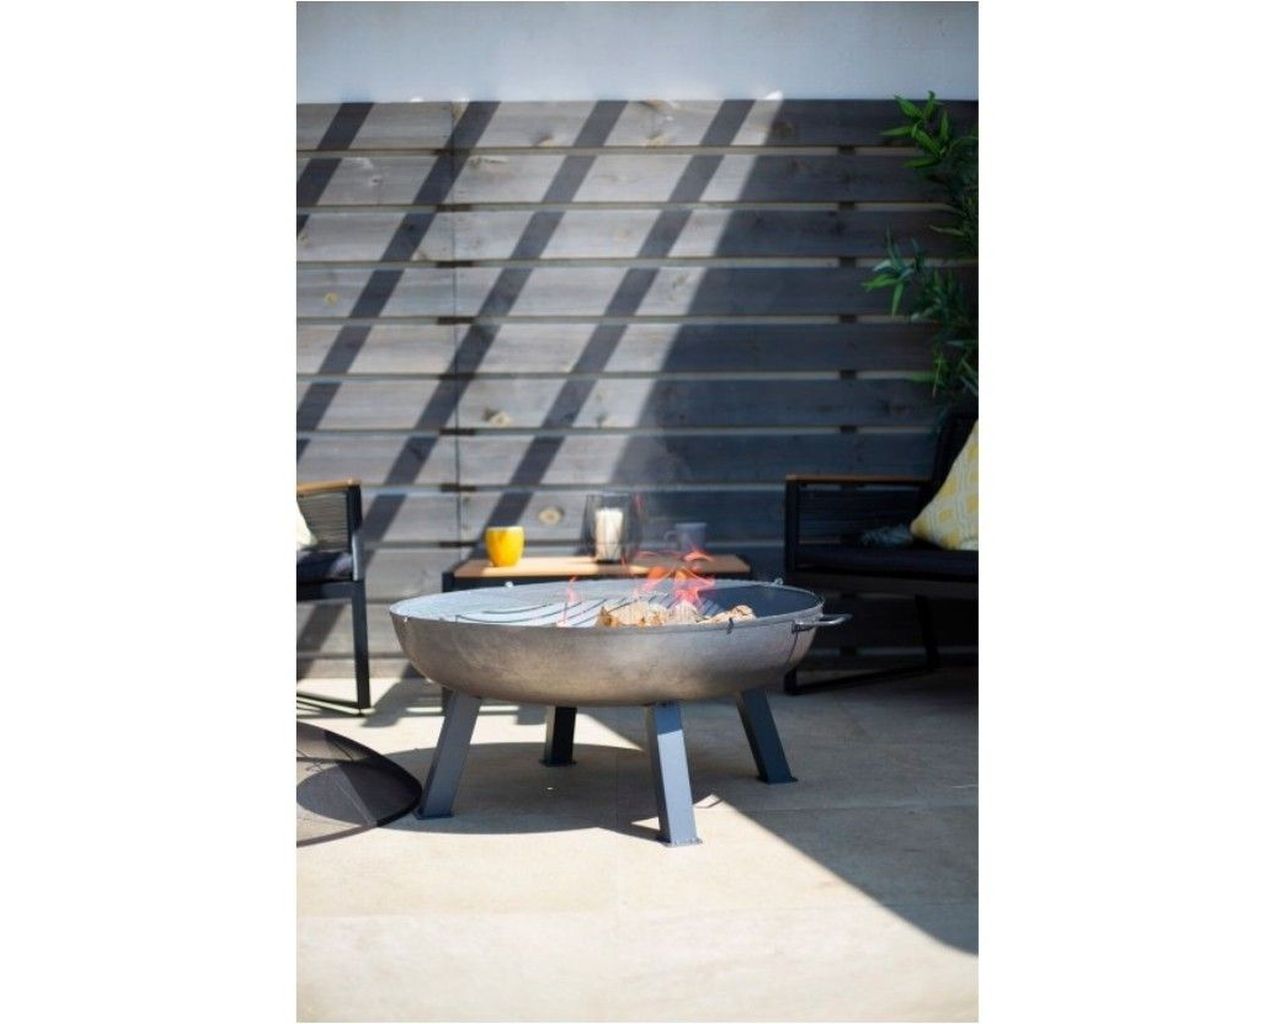 Maxiheat Industrial Firepit, , hi-res image number null